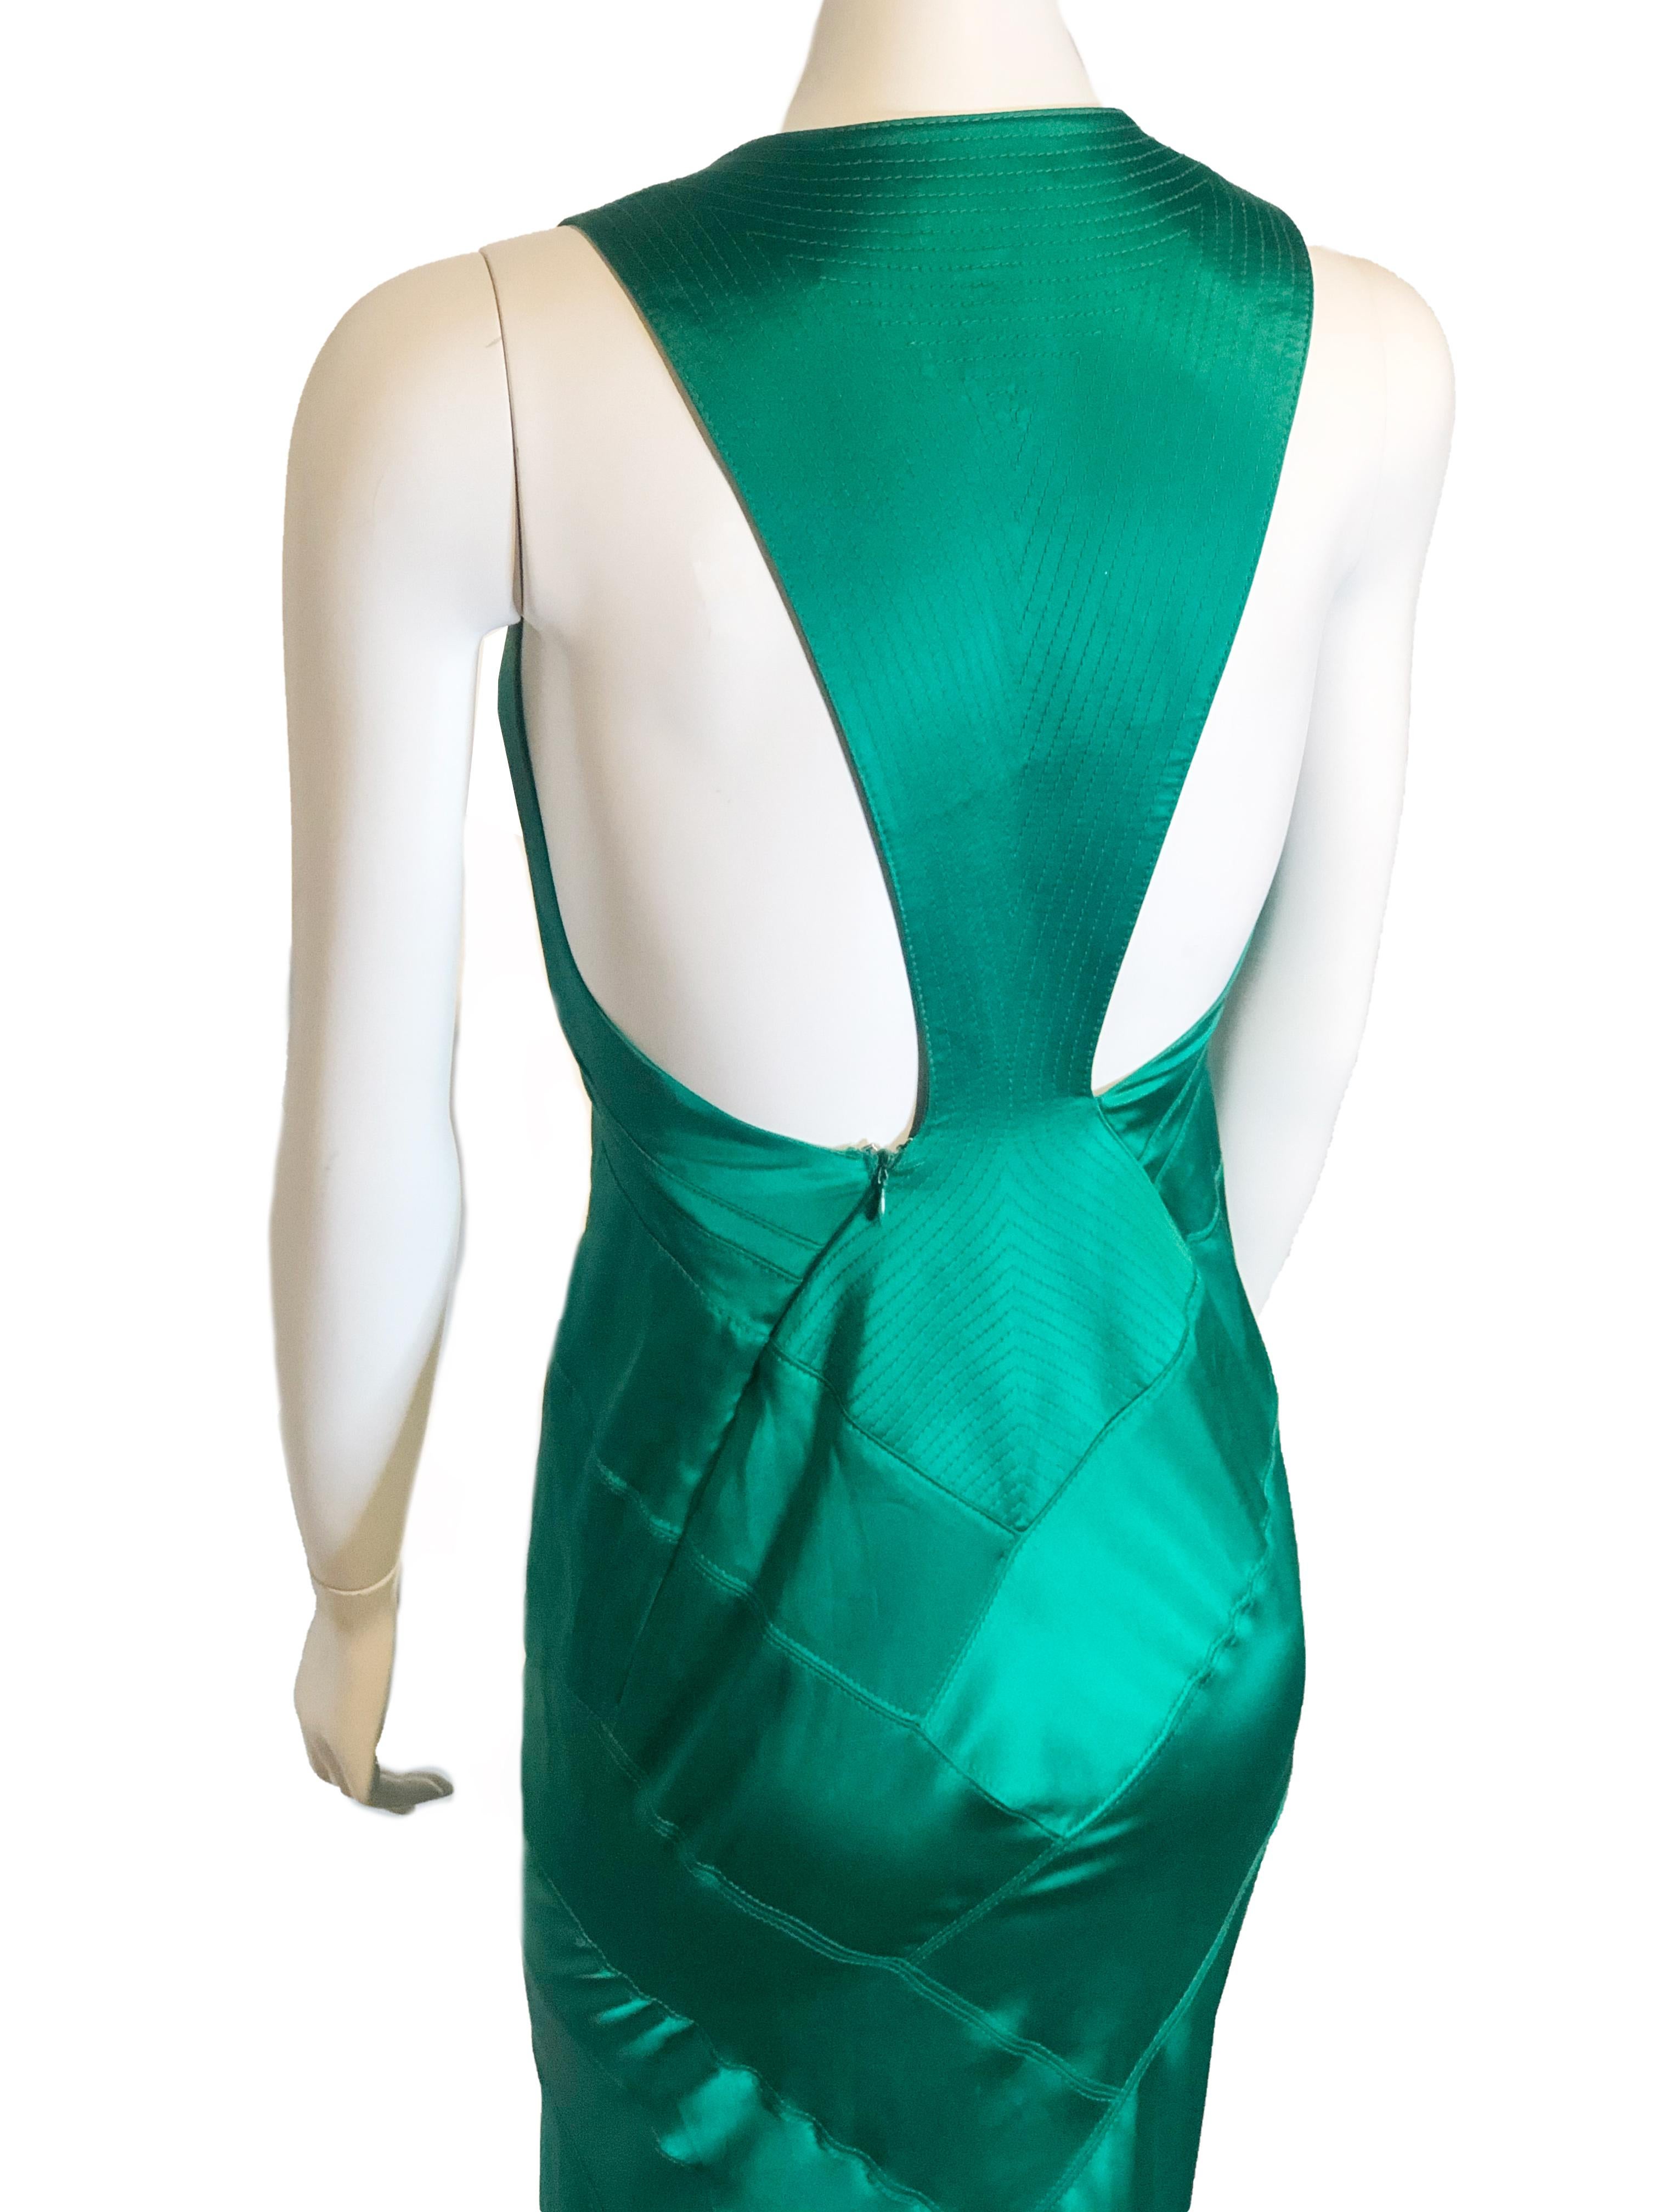 1990 Gianni Versace Emerald Green Silk Satin Bias Gown In Good Condition For Sale In Gresham, OR